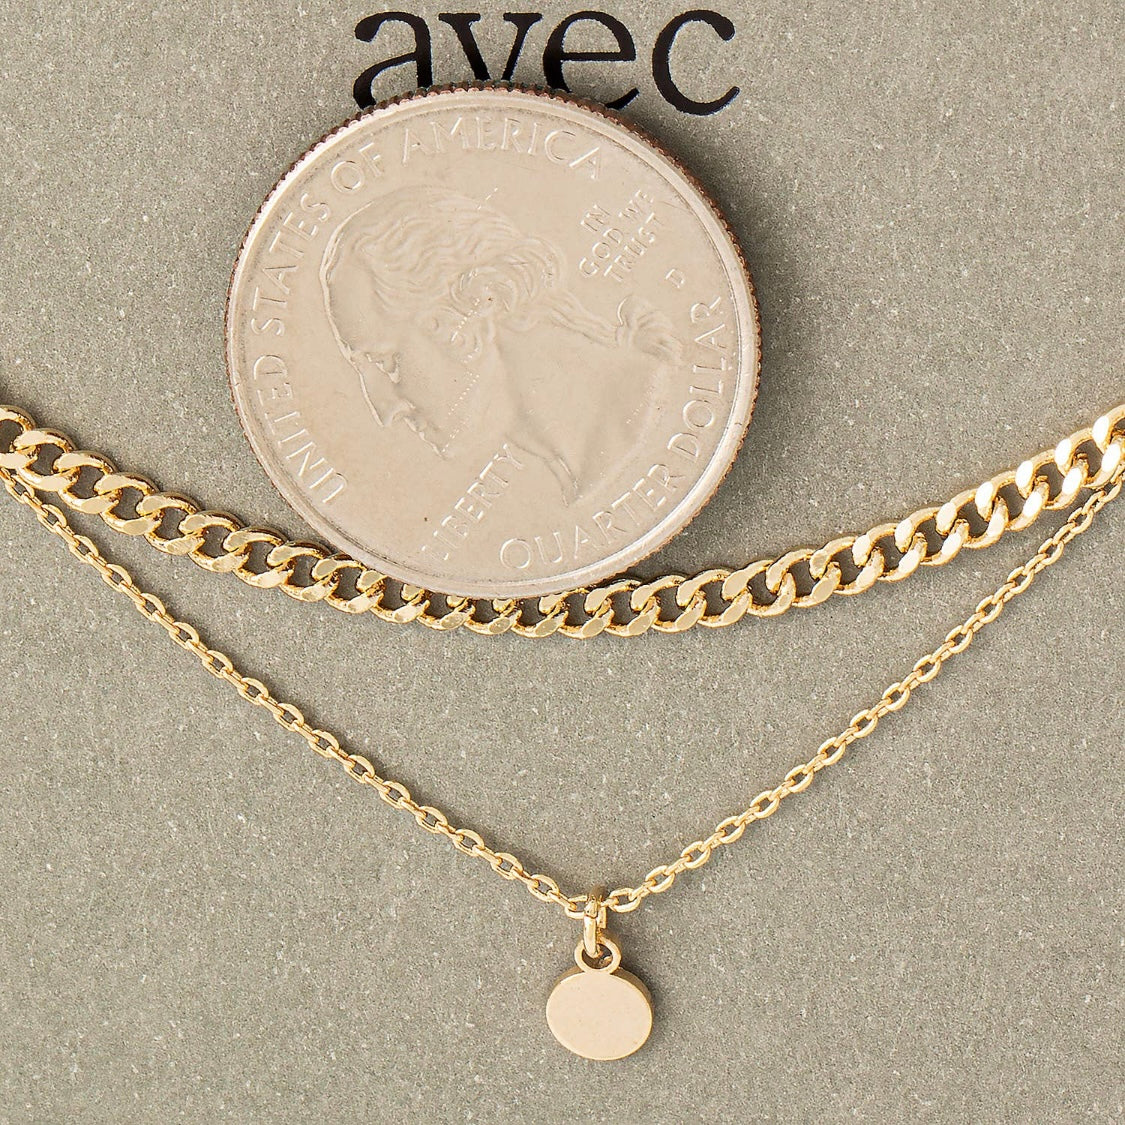 Layered Chain Mini Coin Charm Necklace